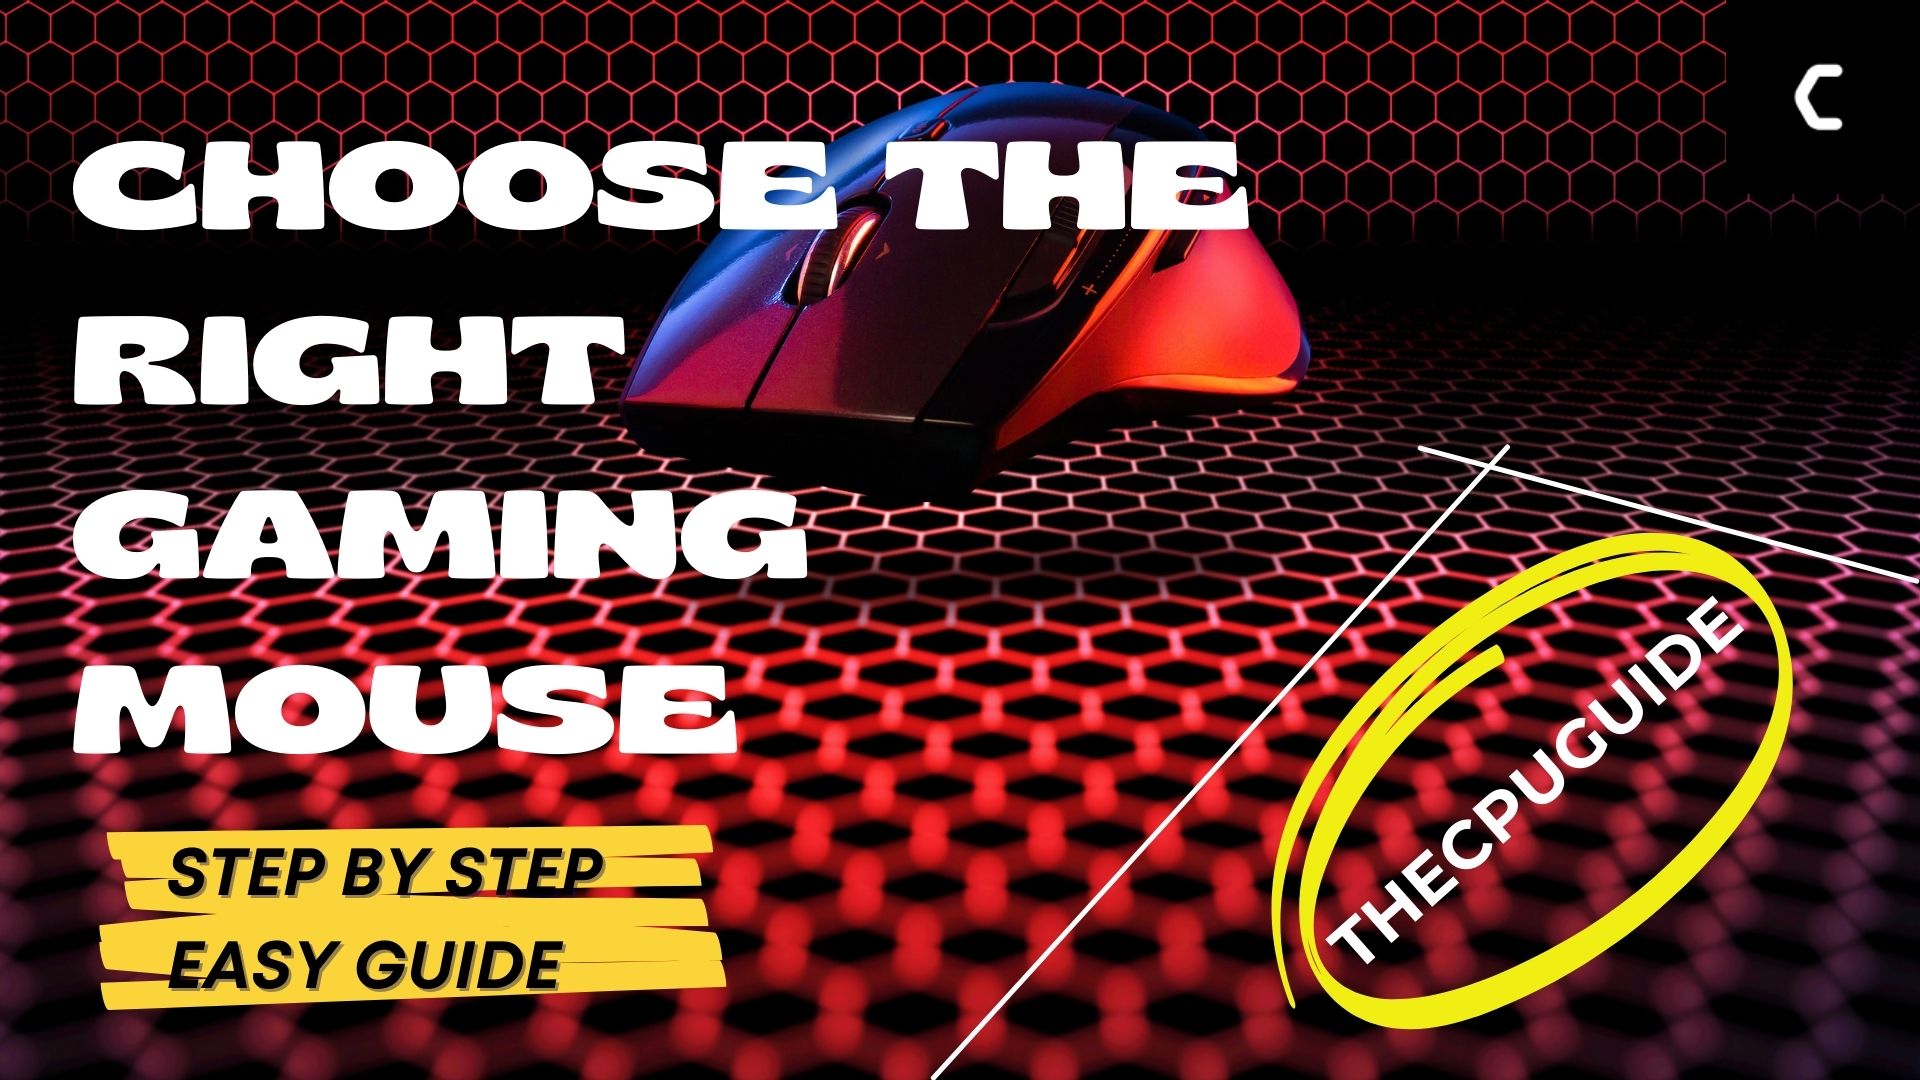 Choose The Right Gaming Mouse Detailed Guide 2021 - corsair mouse roblox lag